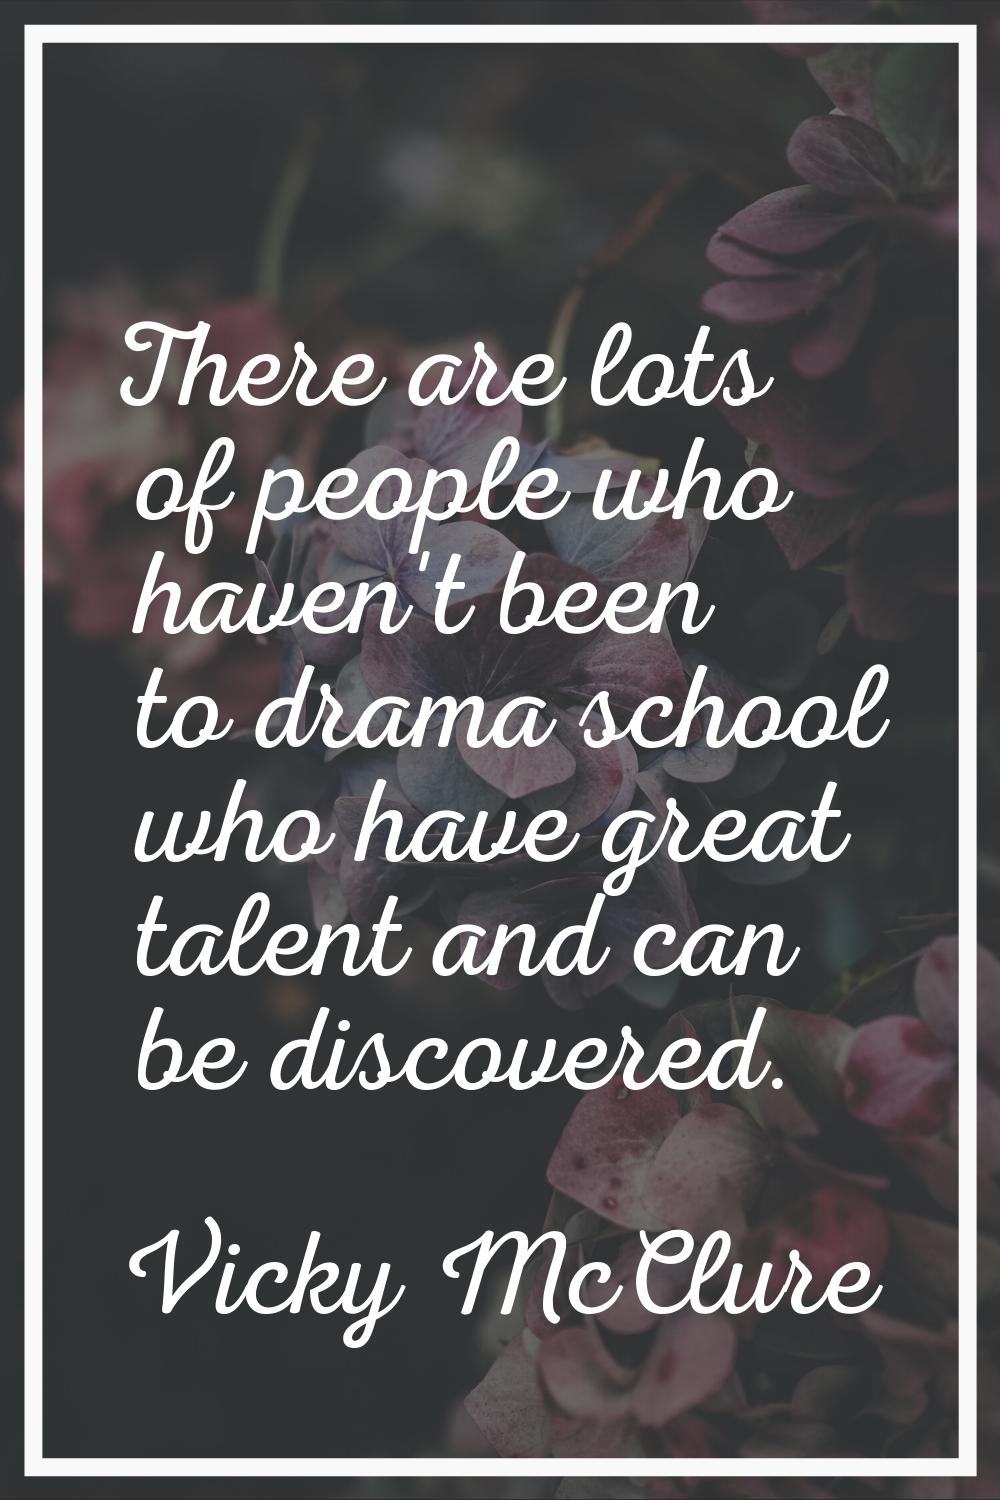 There are lots of people who haven't been to drama school who have great talent and can be discover